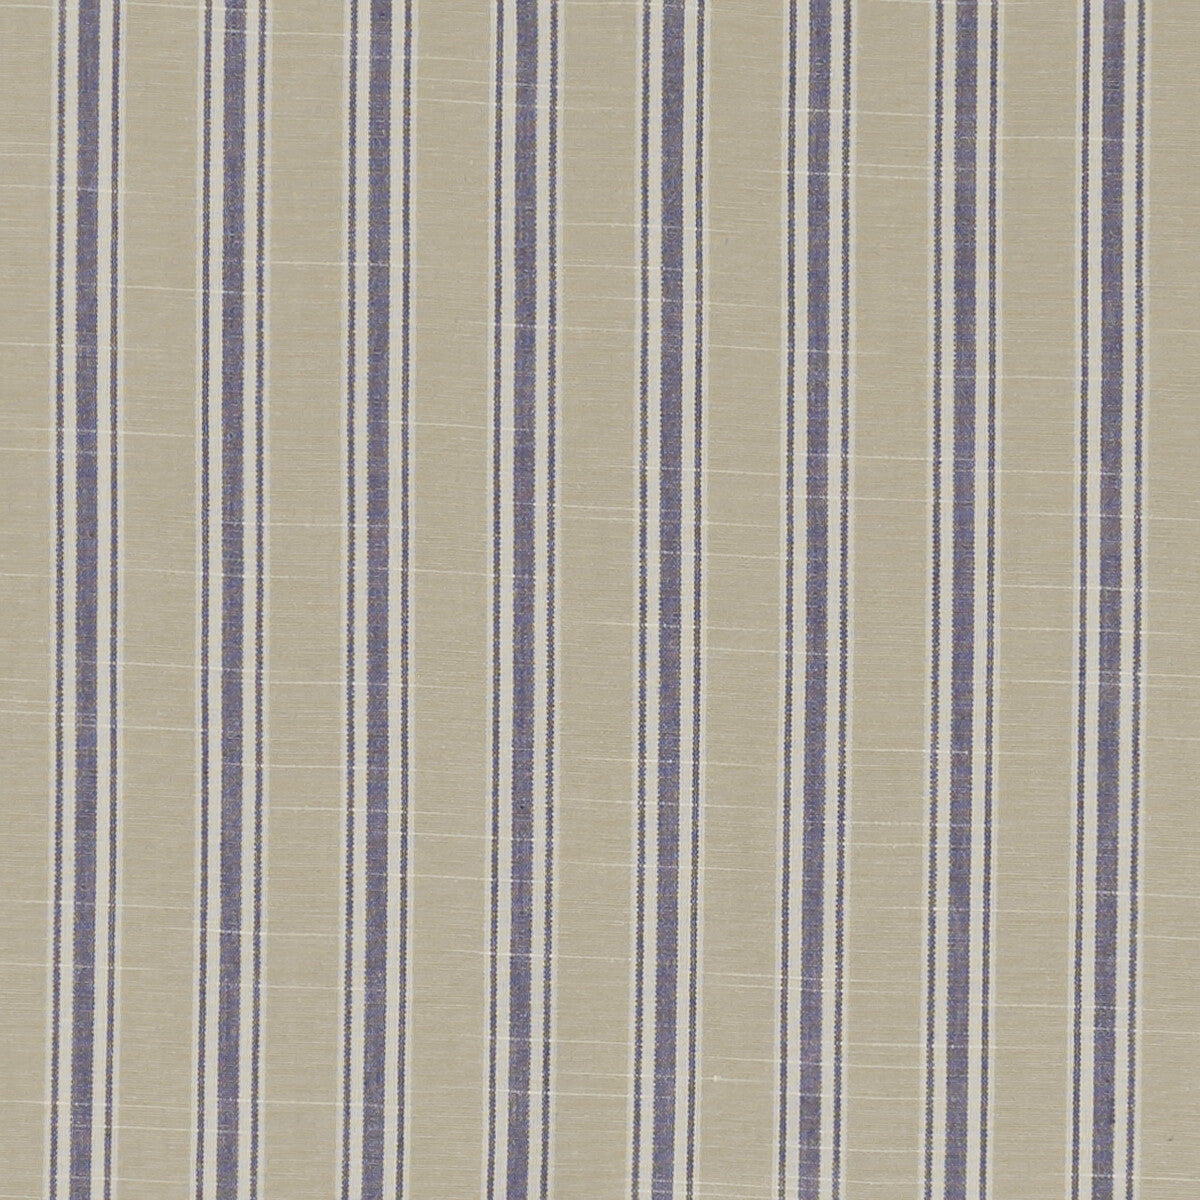 Thornwick fabric in denim color - pattern F1311/04.CAC.0 - by Clarke And Clarke in the Bempton By Studio G For C&amp;C collection